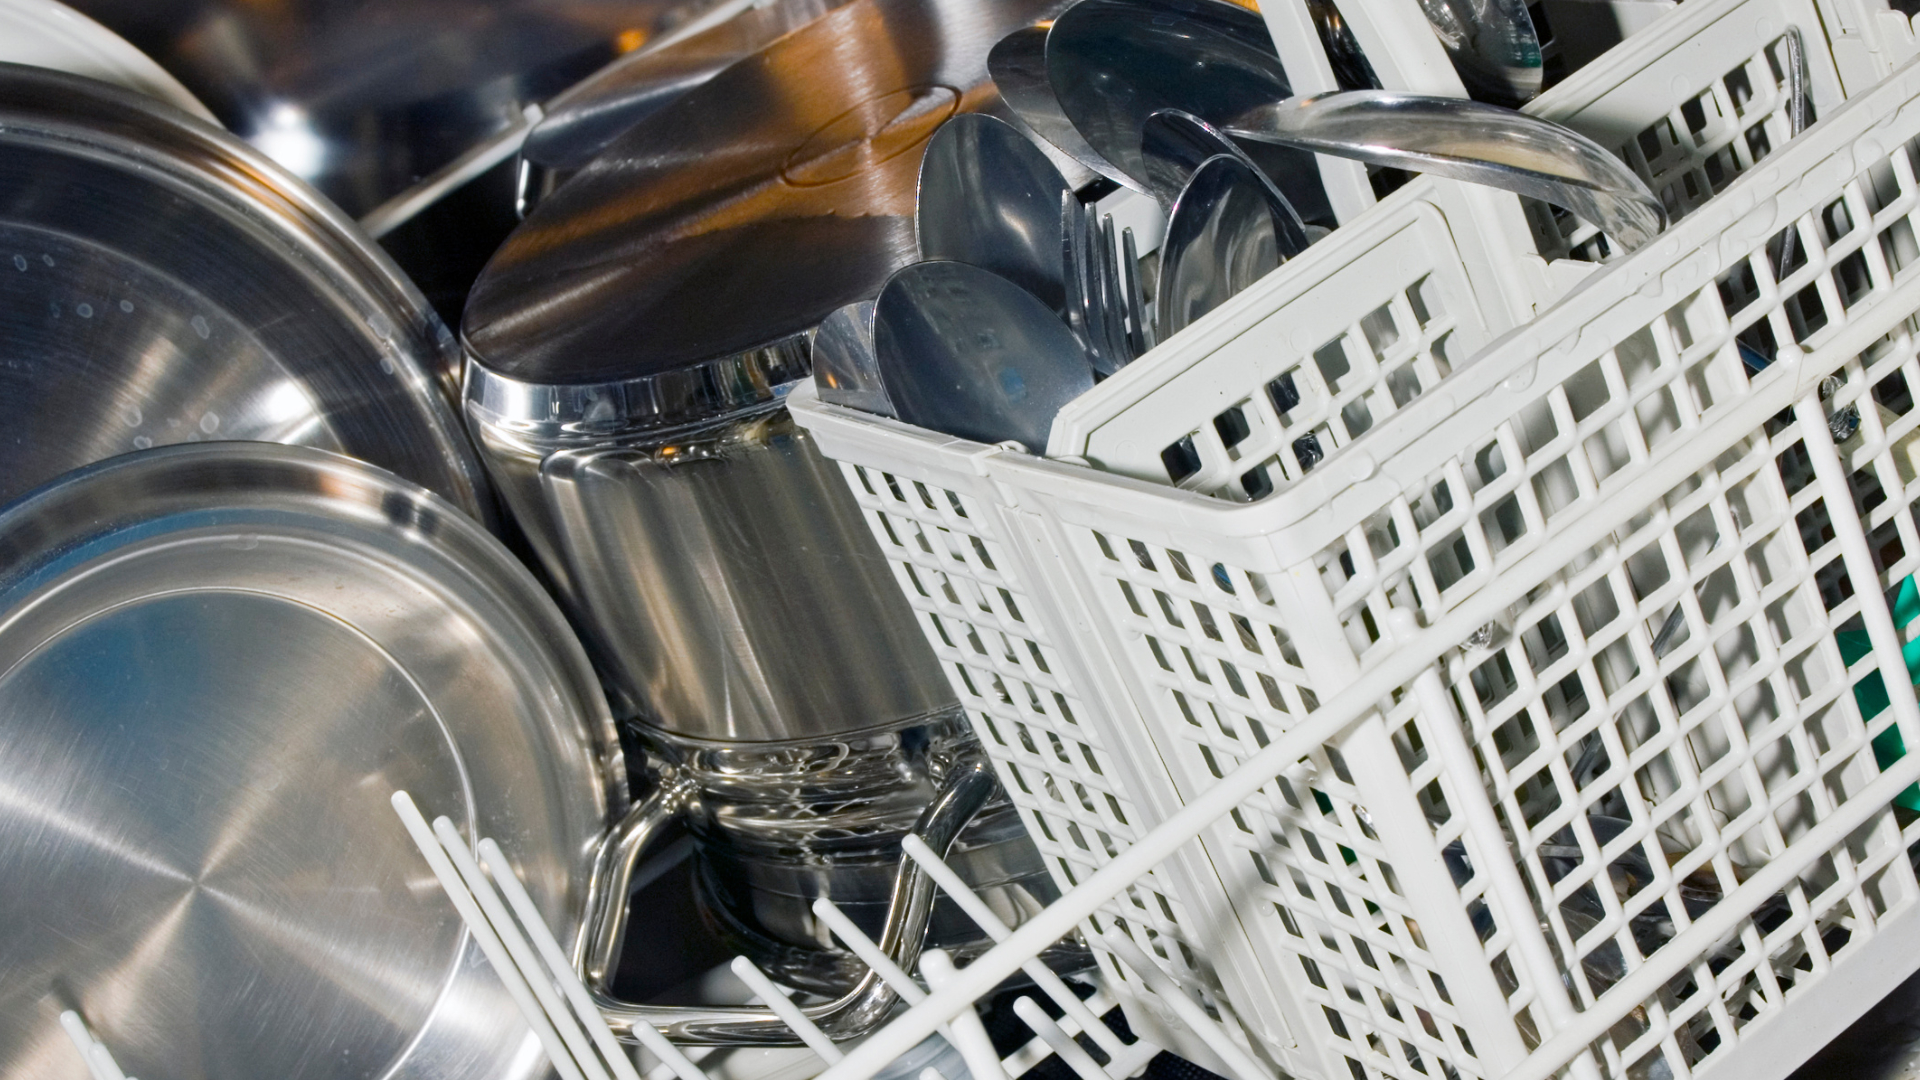 Featured image for “Dishwasher Not Cleaning Dishes Properly? Here’s What To Do”